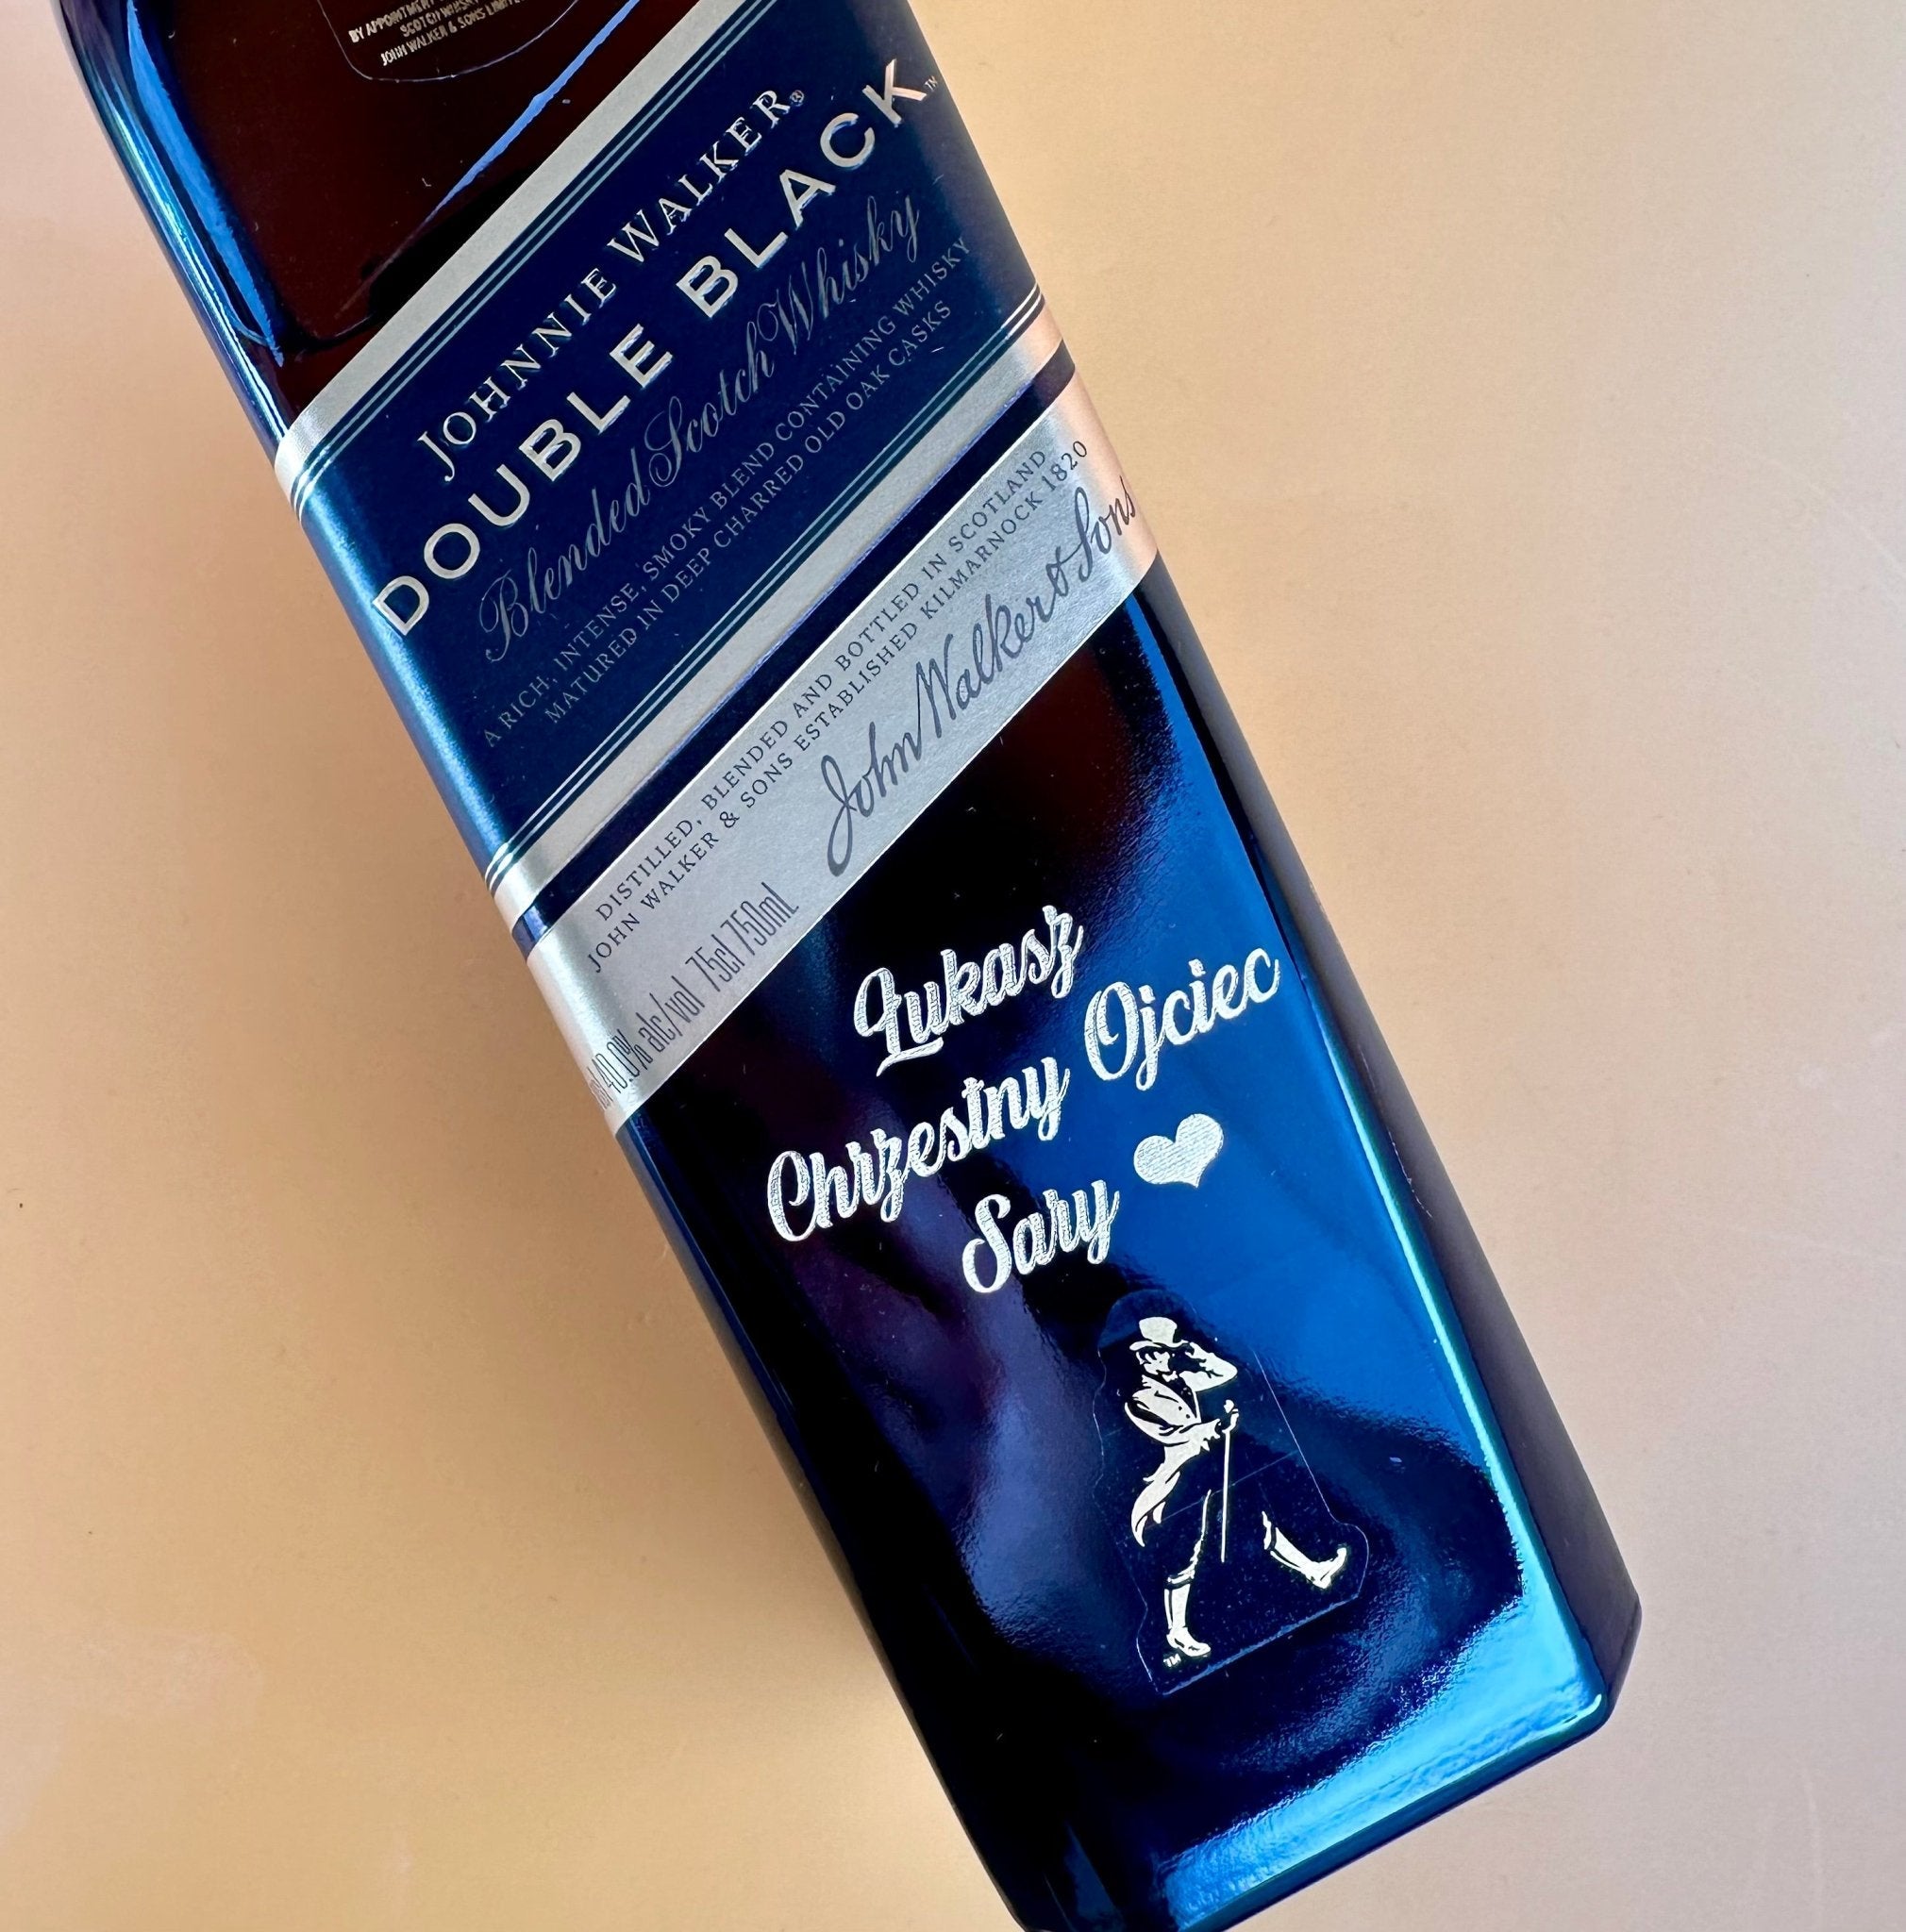 Johnnie Walker Double Black Blended Scotch Whiskey  